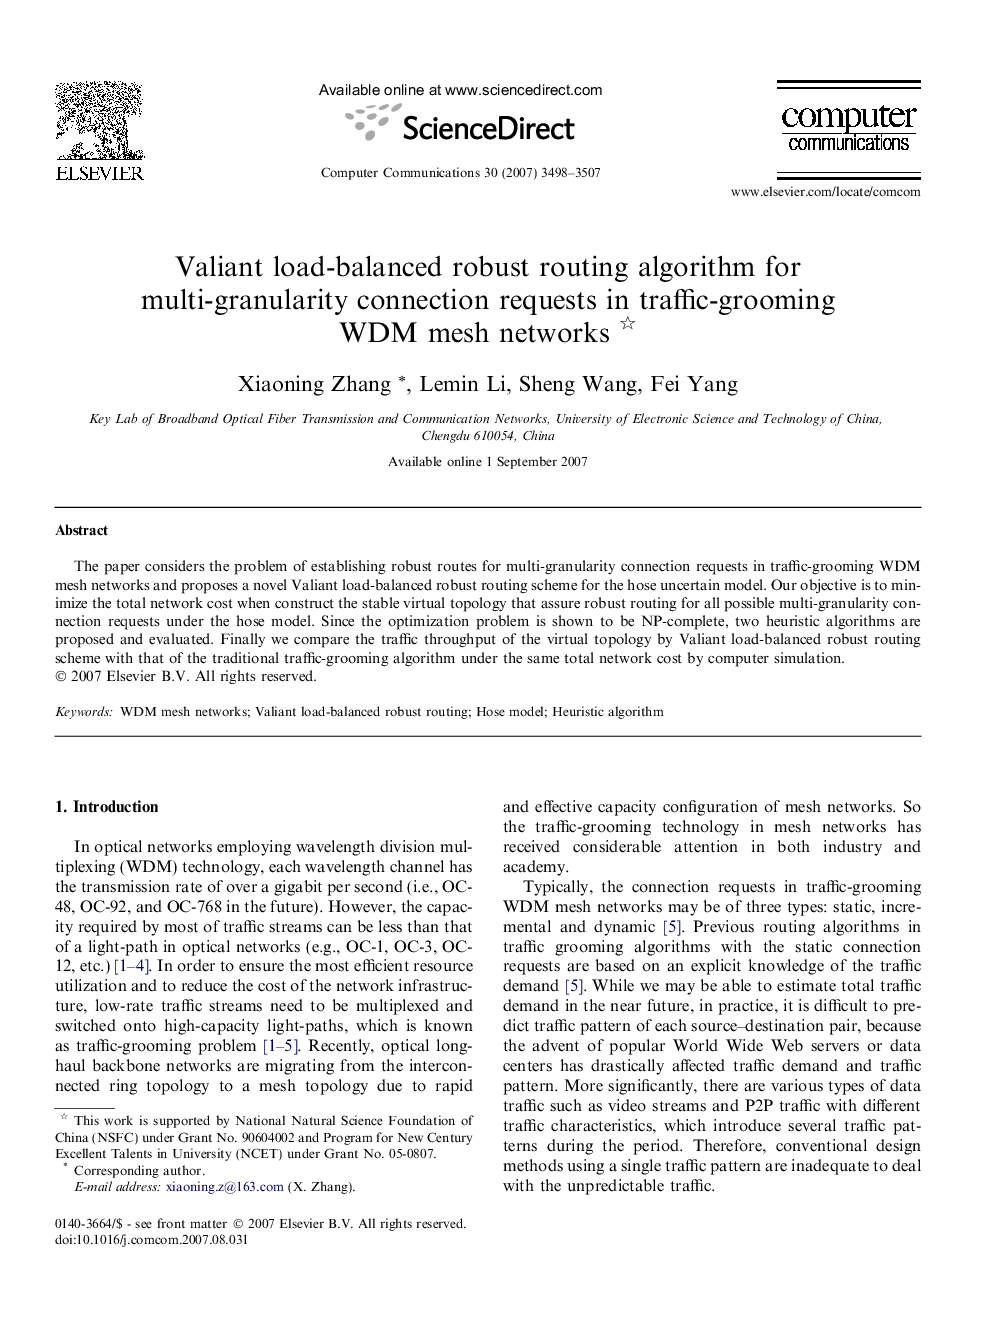 Valiant load-balanced robust routing algorithm for multi-granularity connection requests in traffic-grooming WDM mesh networks 